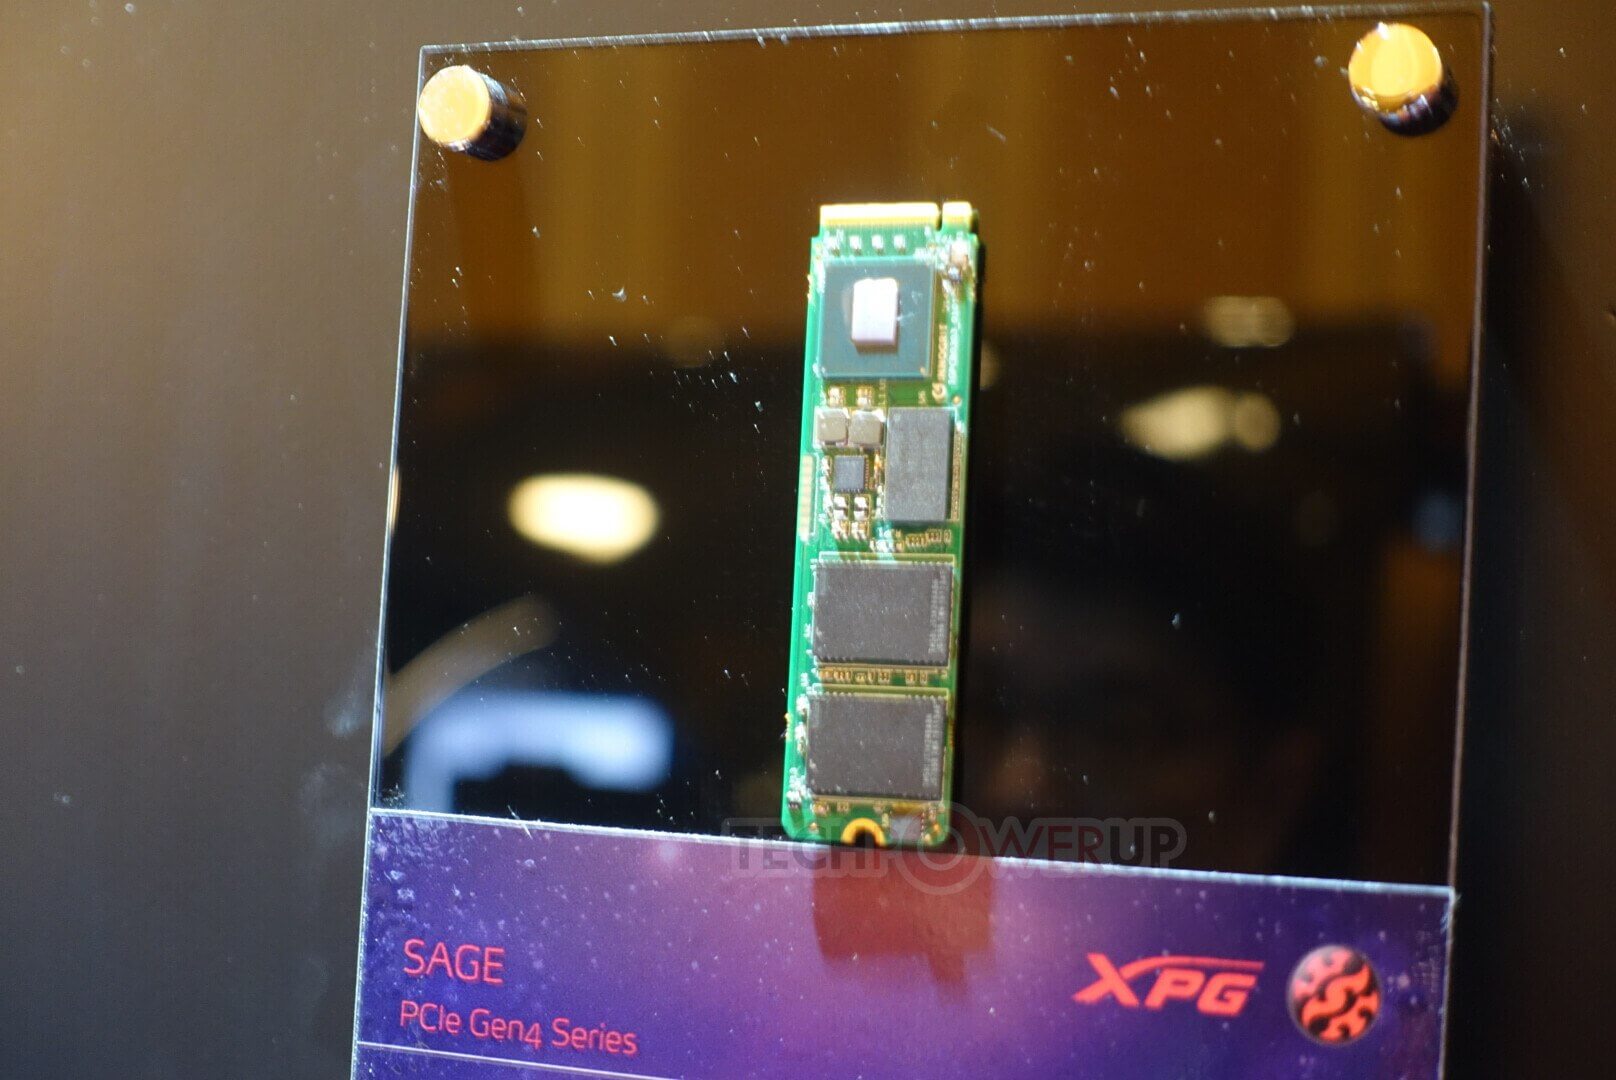 Adata's upcoming PCIe 4.0 SSD boasts read speeds of over 7,000 MB 